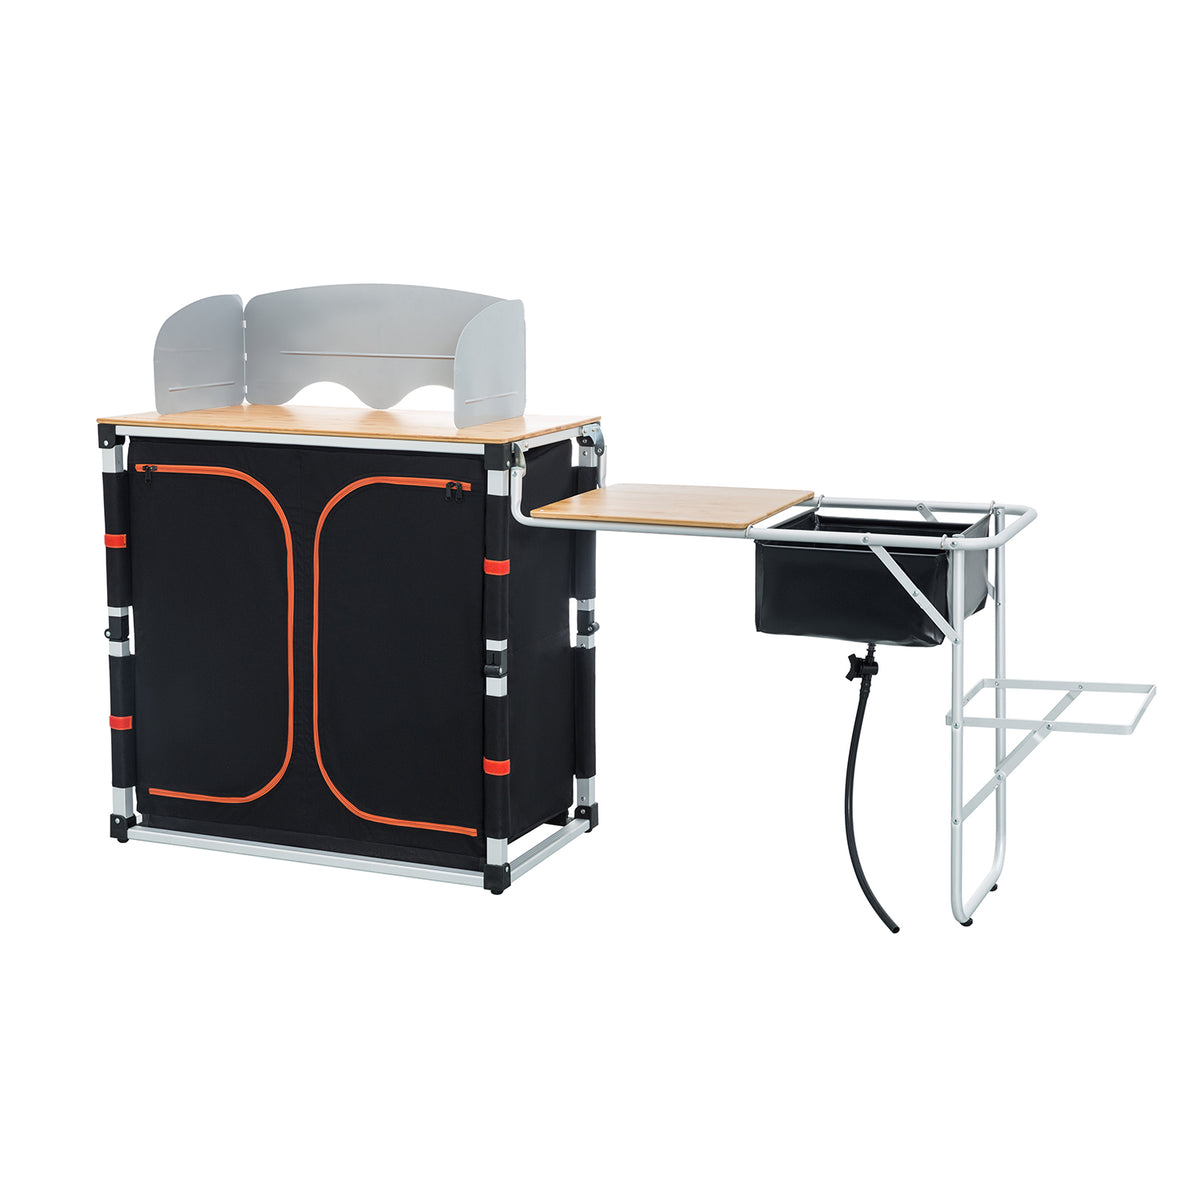 Bentism Camping Kitchen Table Folding Portable Cook Station 5 Tables & 2 Shelves, Size: Basic